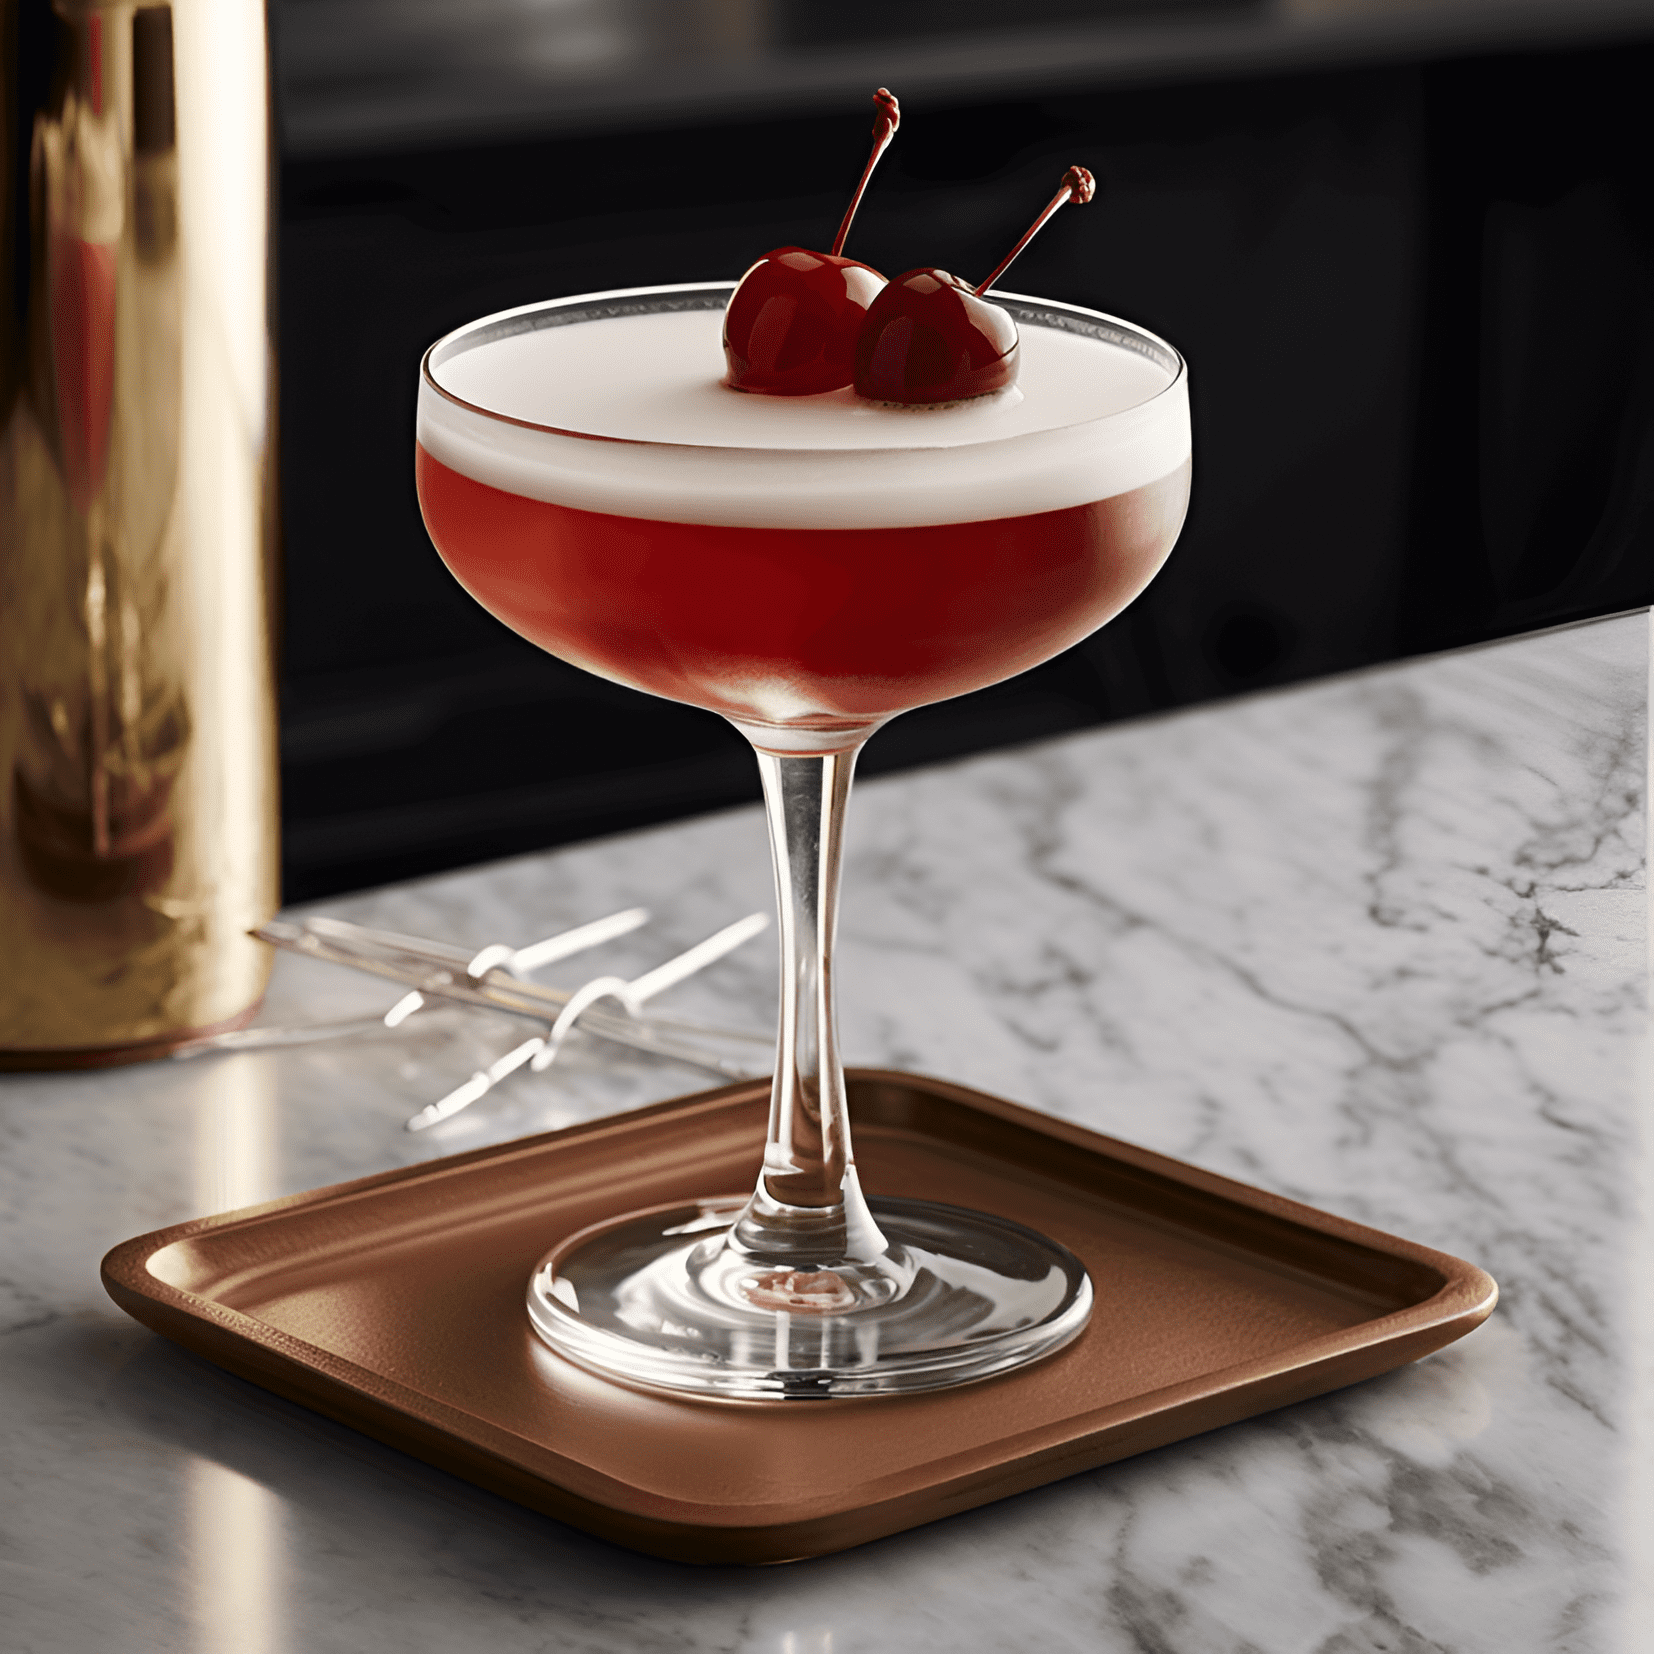 Commodore Cocktail Recipe - The Commodore cocktail is a rich, smooth, and slightly sweet drink with a hint of sourness. The combination of whiskey, lemon juice, and sugar creates a strong, yet balanced flavor profile. The addition of grenadine adds a touch of sweetness and a beautiful reddish hue to the drink.